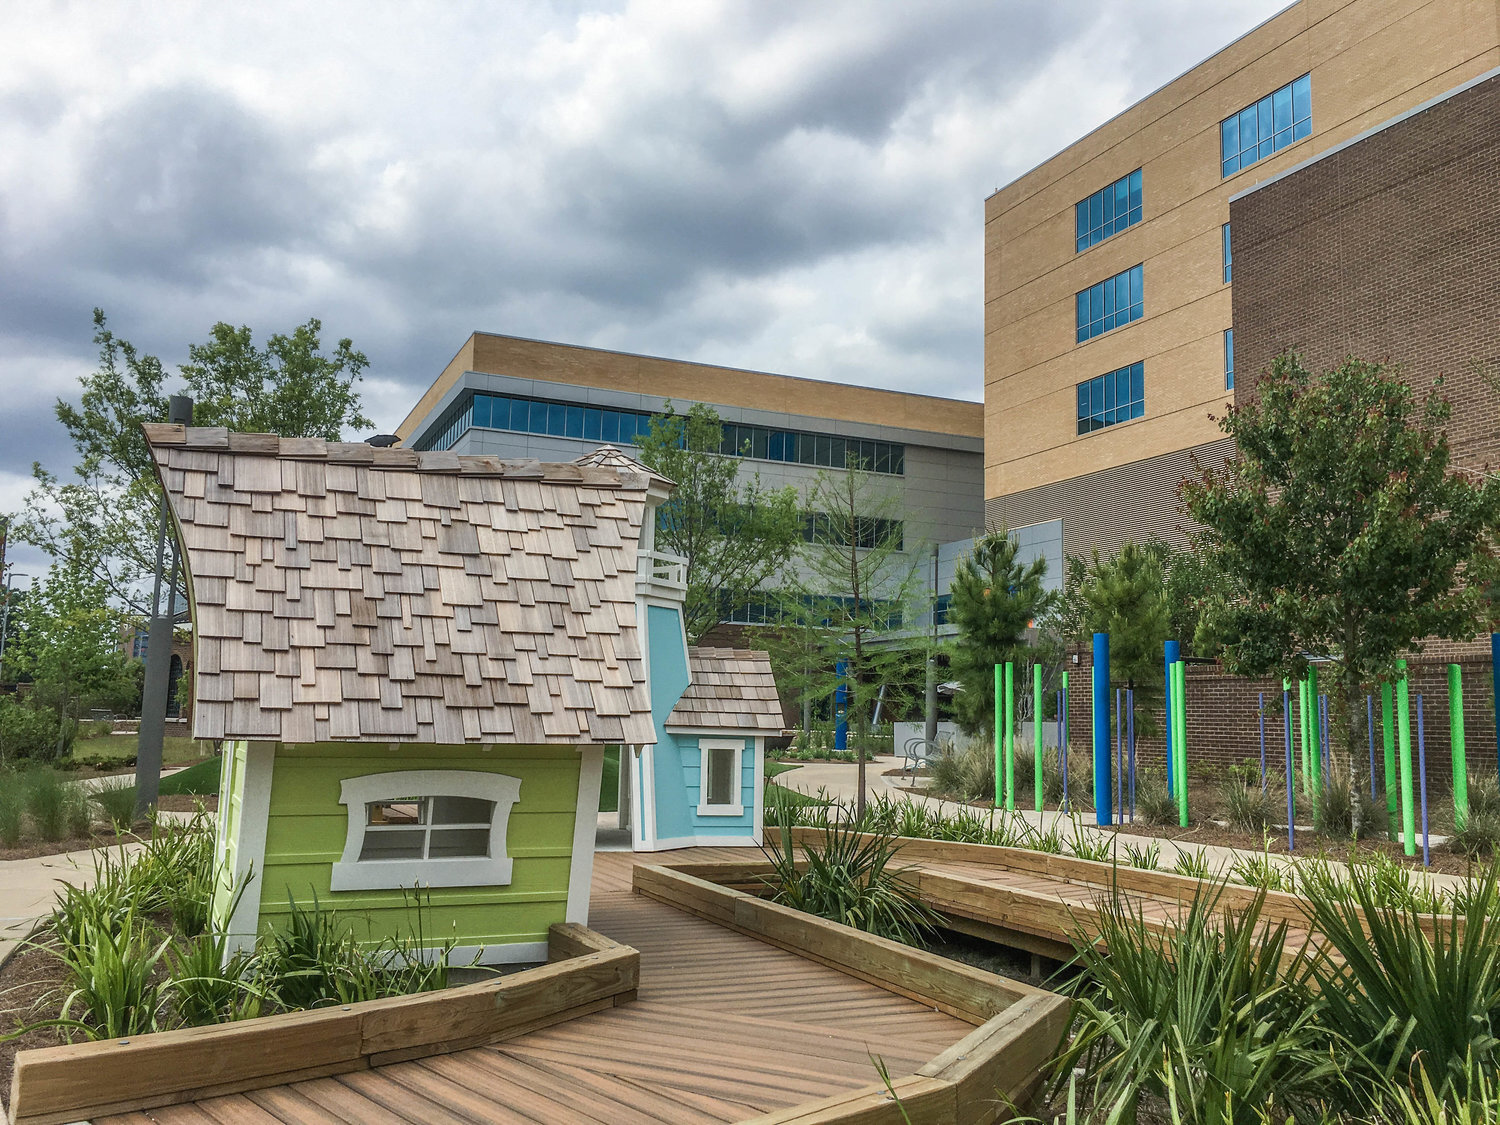 Our Lady of the Lake Children's Hospital Pavillion